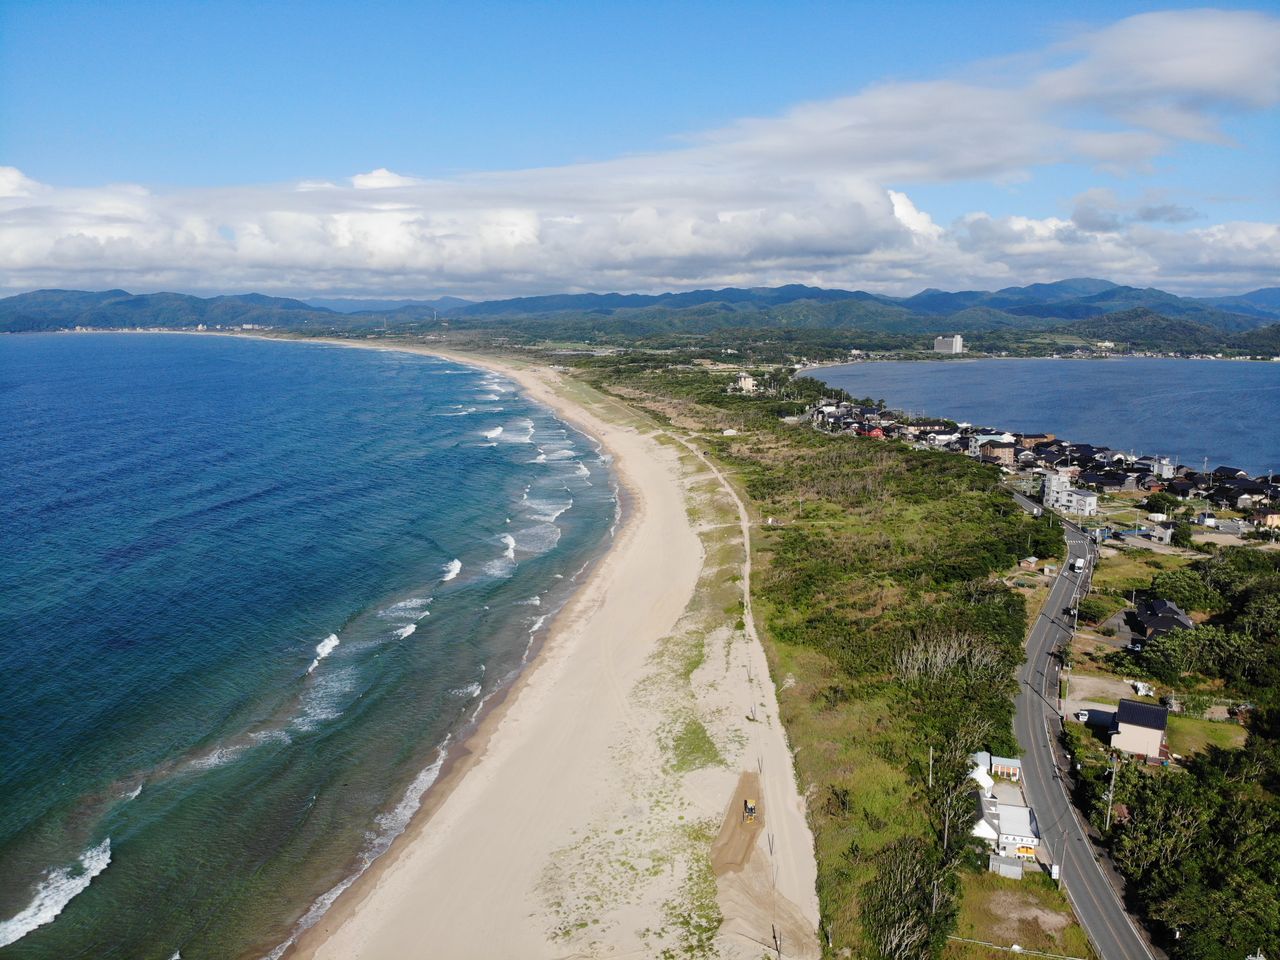 Shōtenkyō, sandwiched by the Sea of Japan on the left and on the right by Kumihama Bay, is a sandbar reminiscent of the more famous Amanohashidate. (© Pixta)